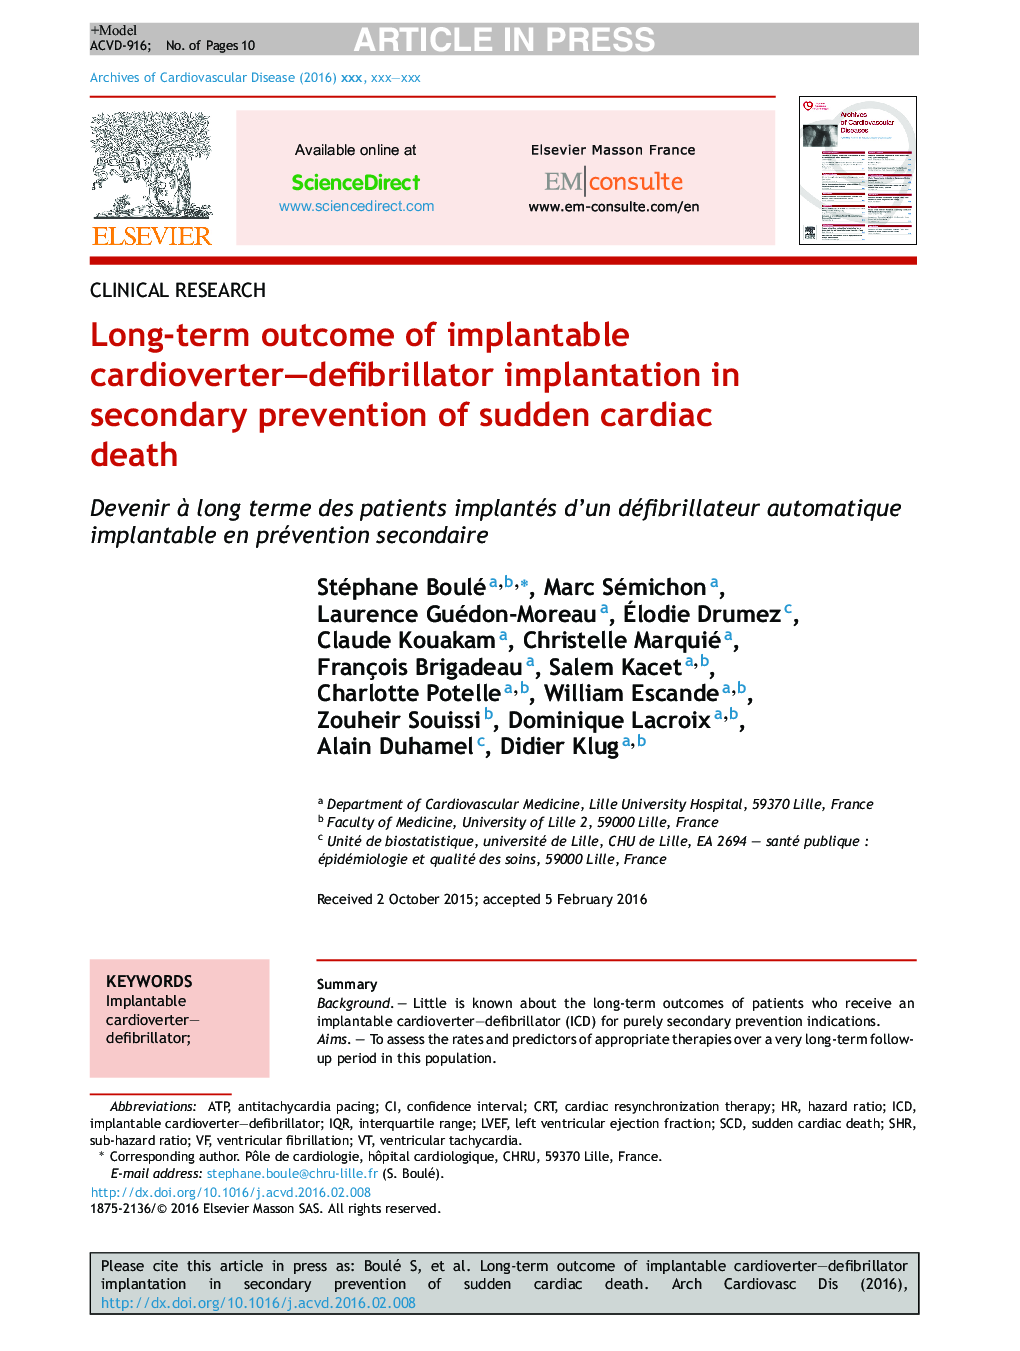 Long-term outcome of implantable cardioverter-defibrillator implantation in secondary prevention of sudden cardiac death